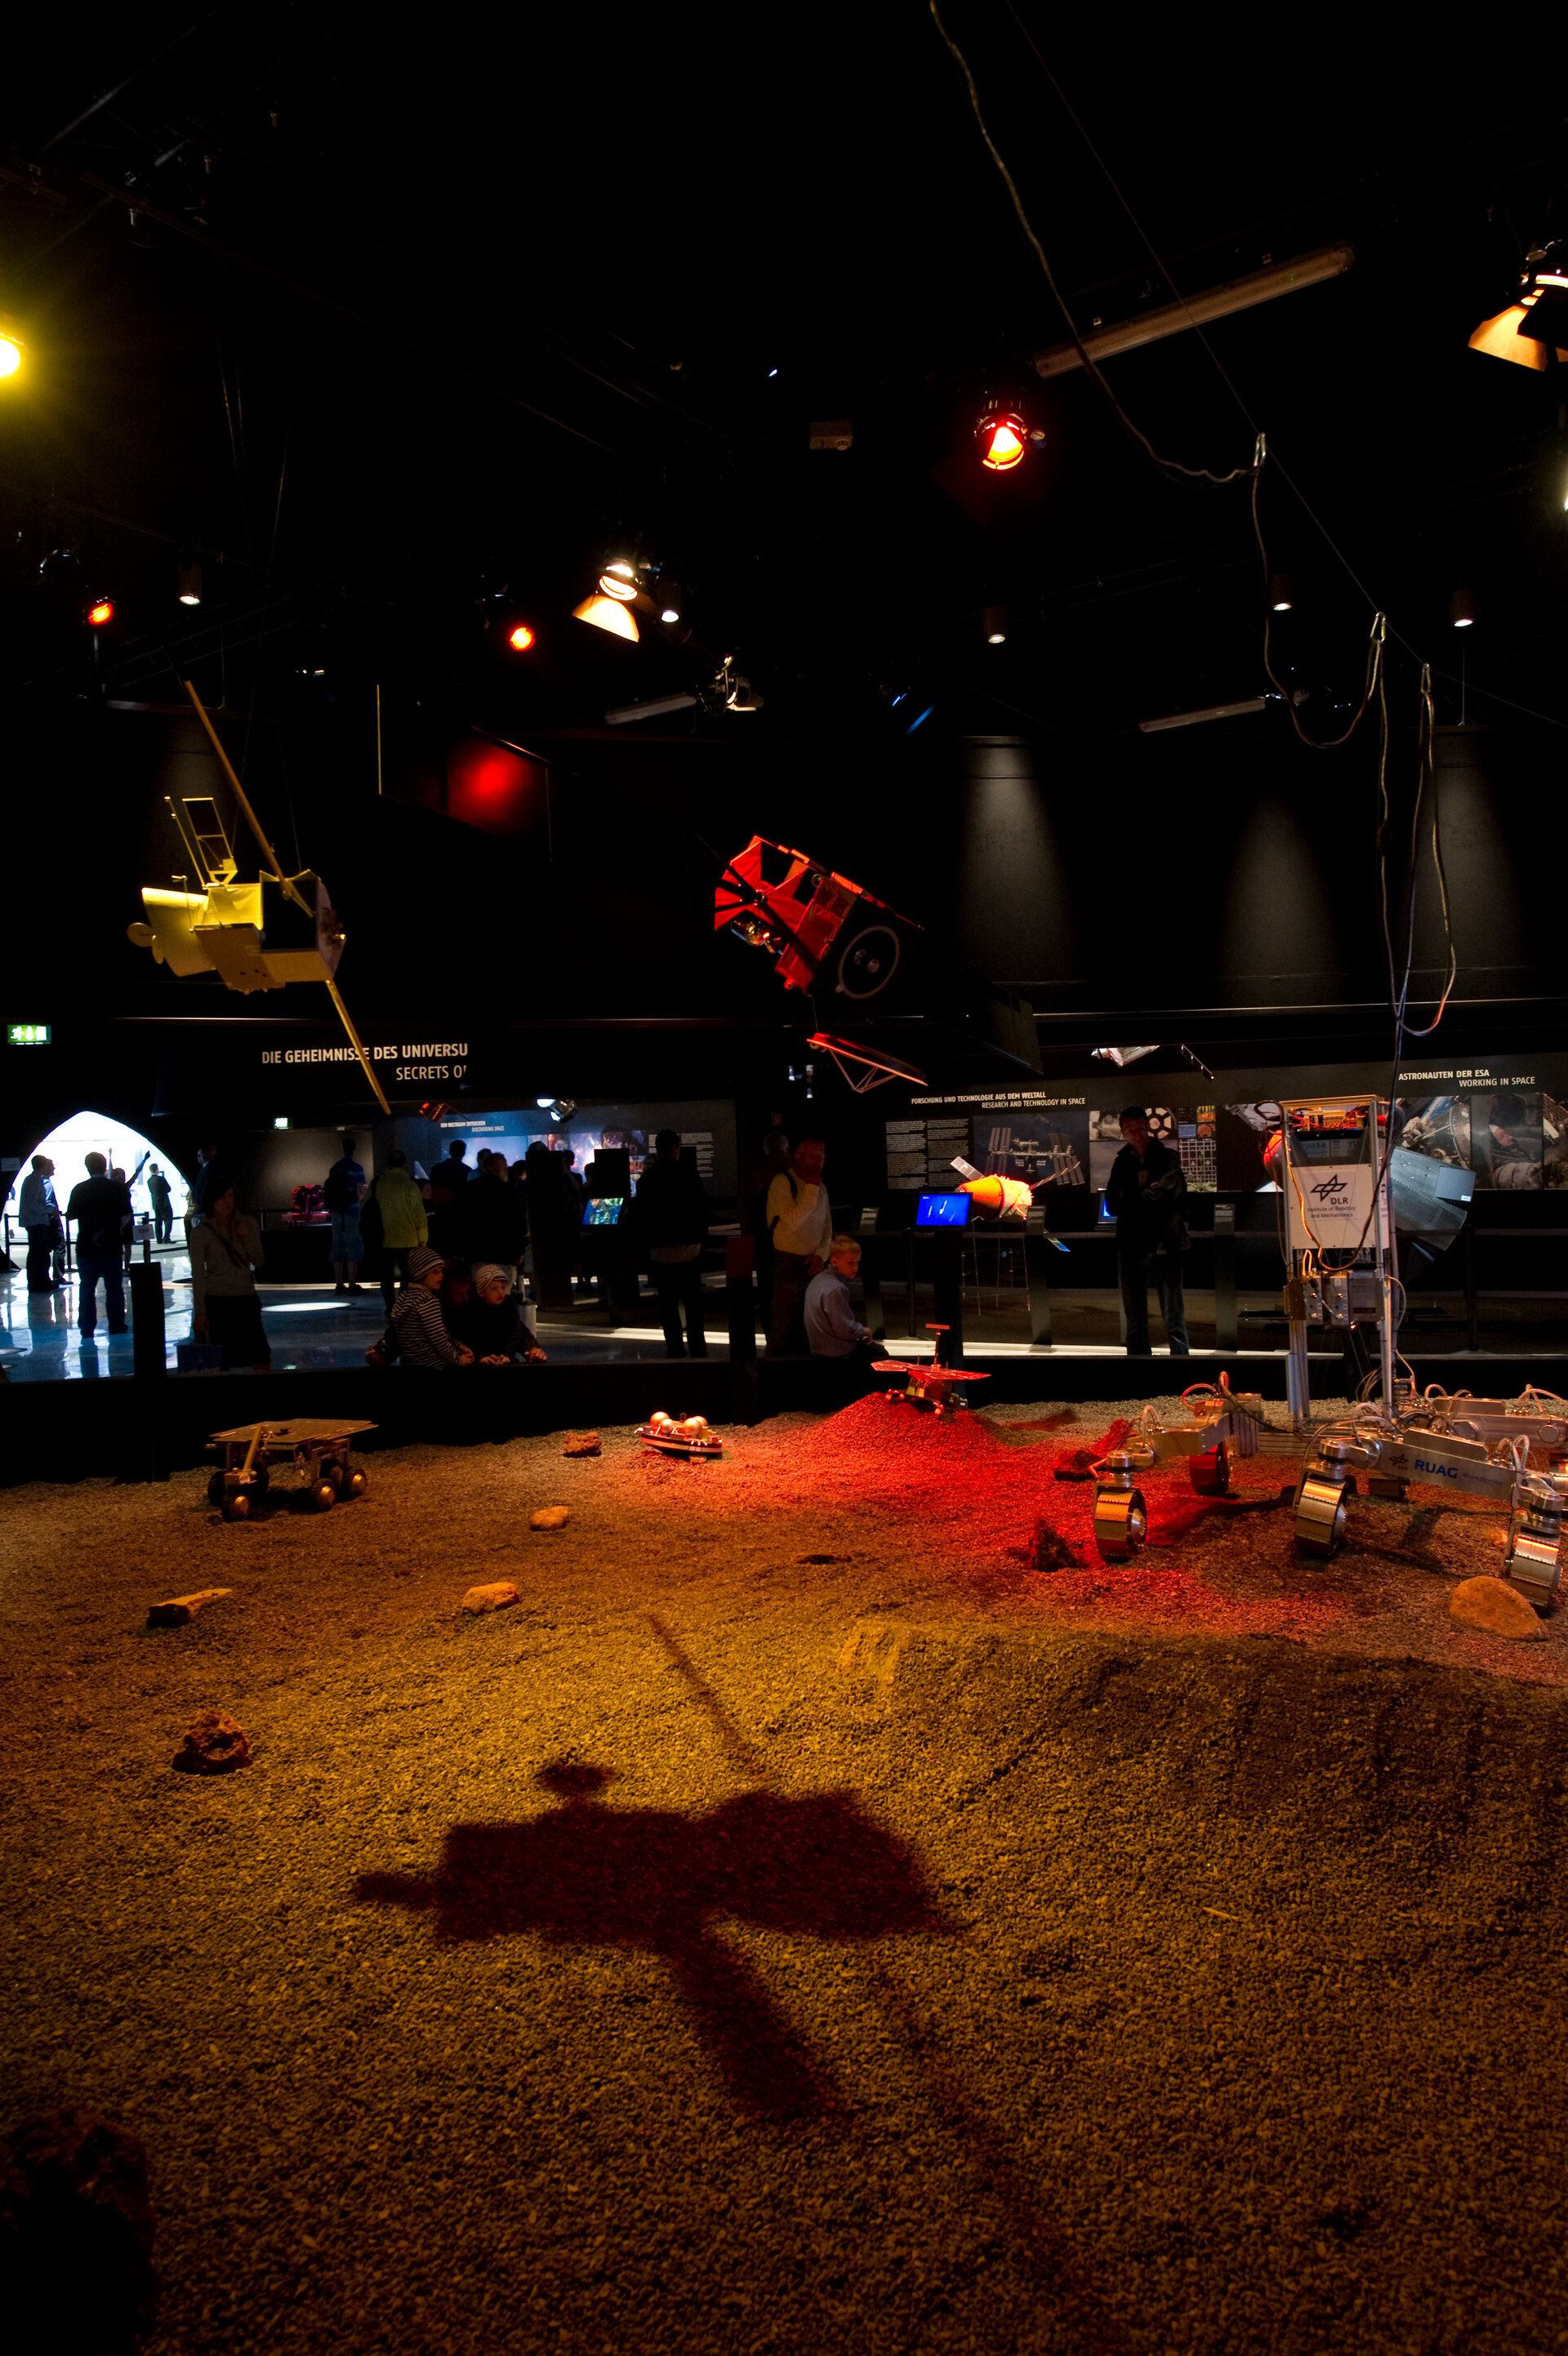 Mars terrain showing technology and future missions